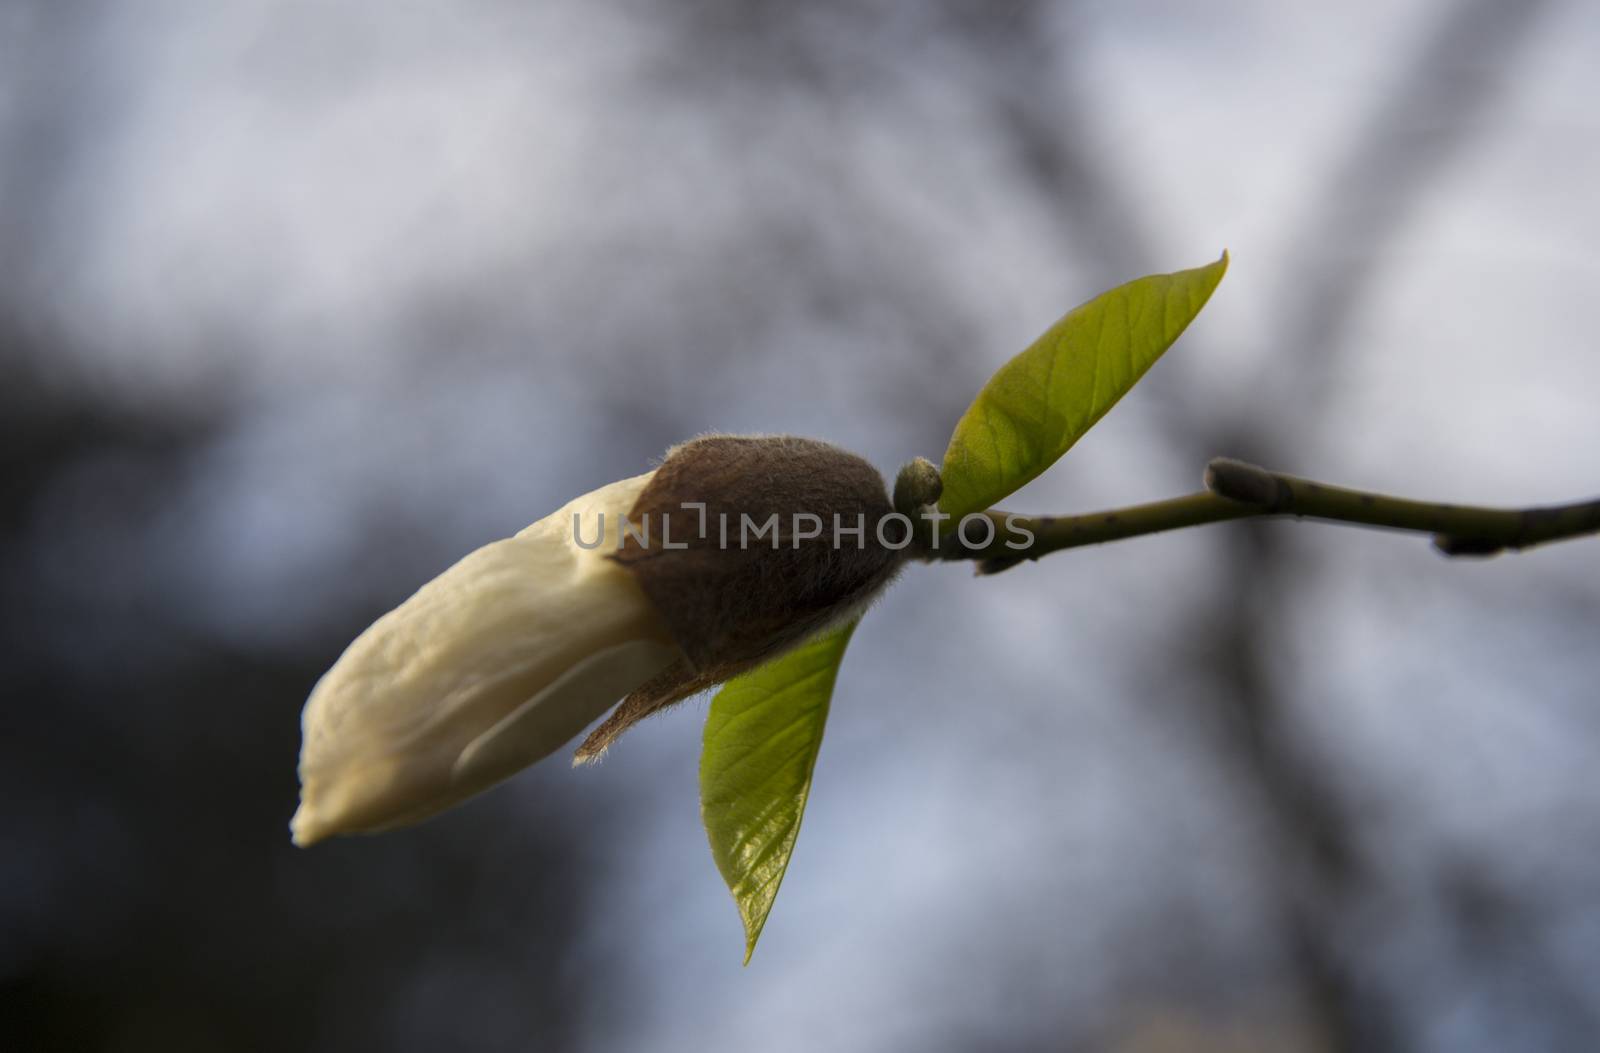 Bud of a yellow magnolia on a tree branch by Irene1601